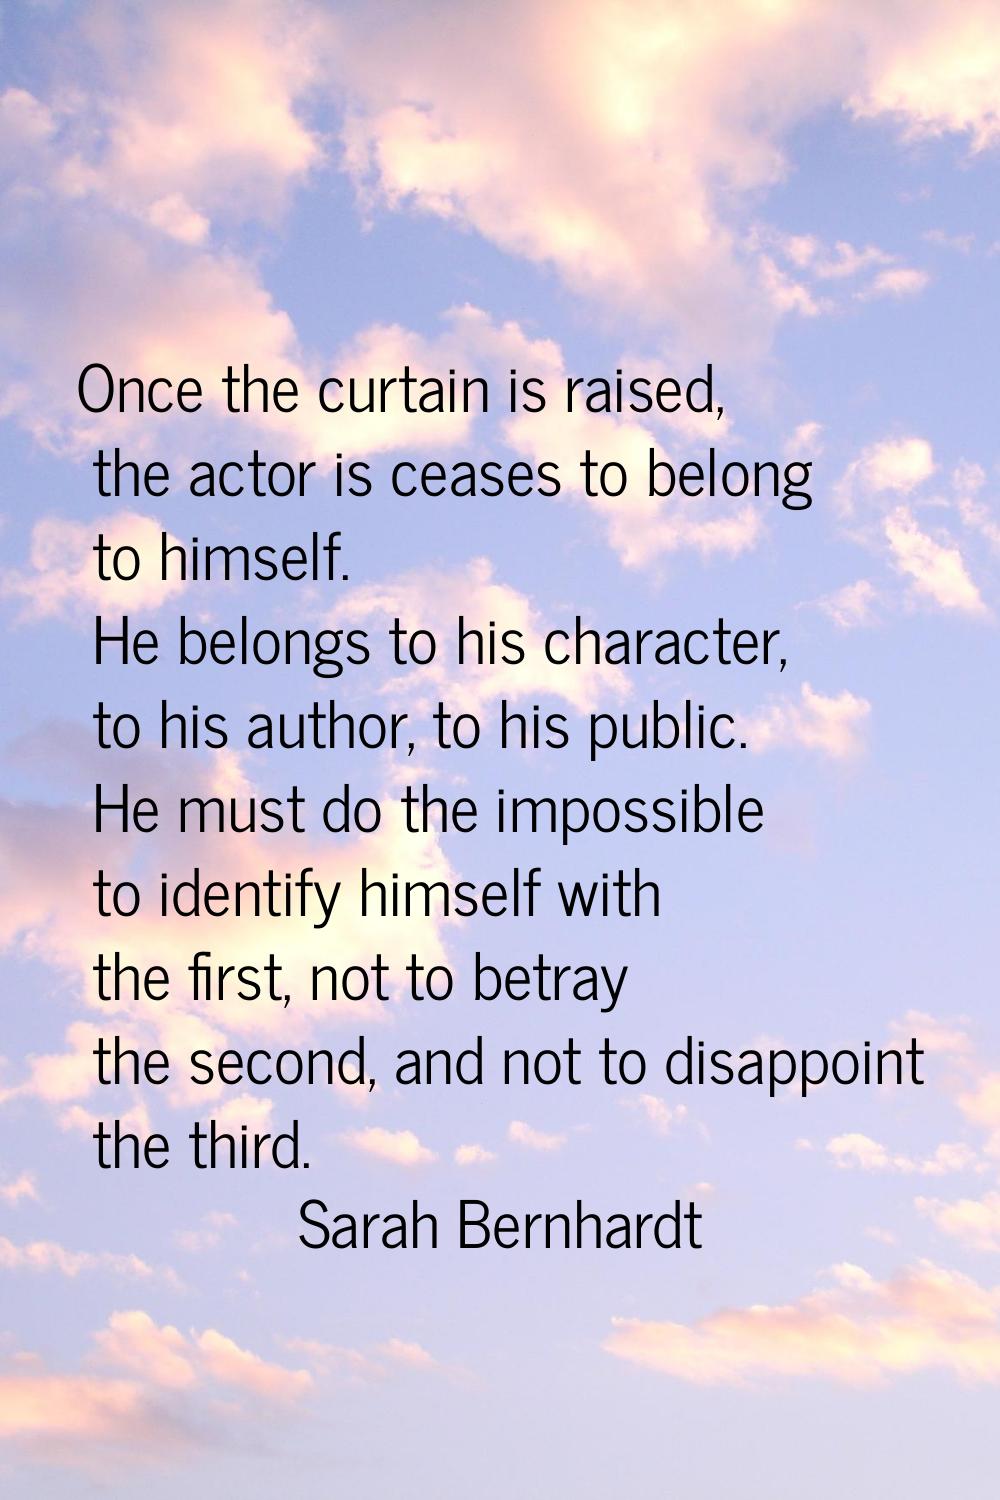 Once the curtain is raised, the actor is ceases to belong to himself. He belongs to his character, 